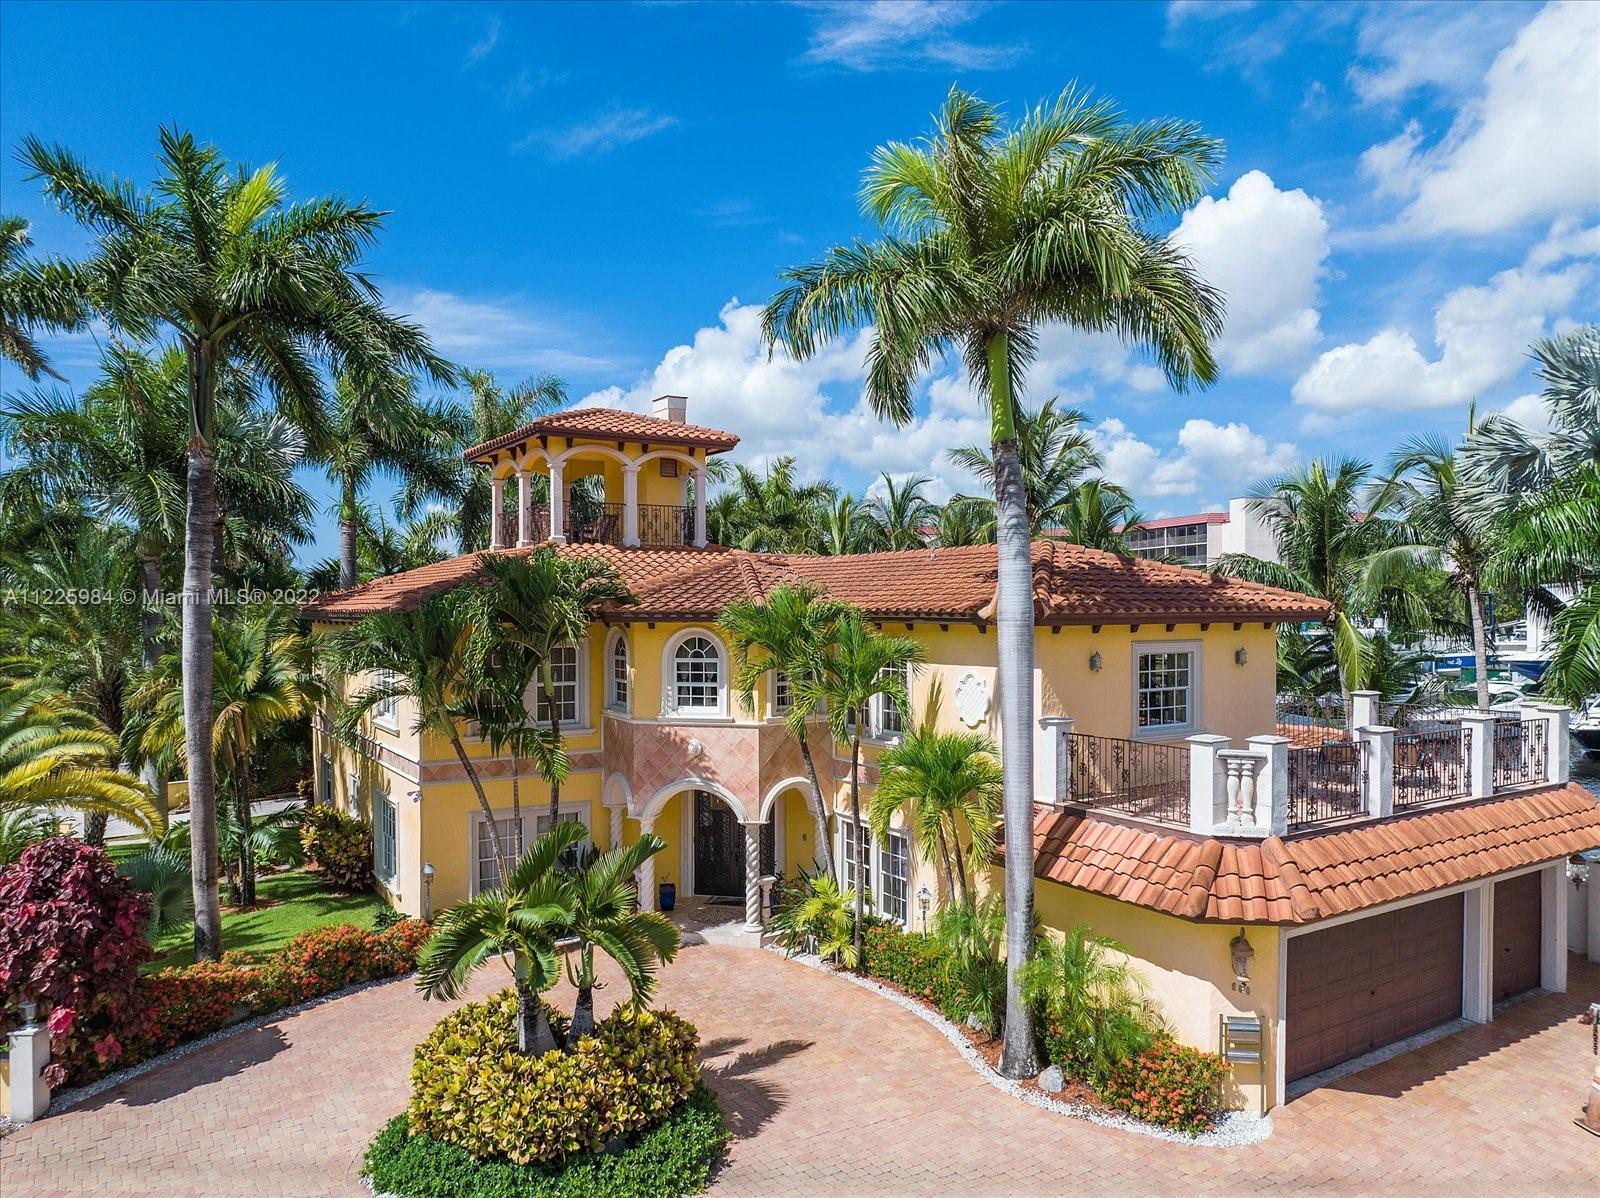 Welcome to Florida living at its best! This Mediterranean home is a boater’s paradise, situated on a